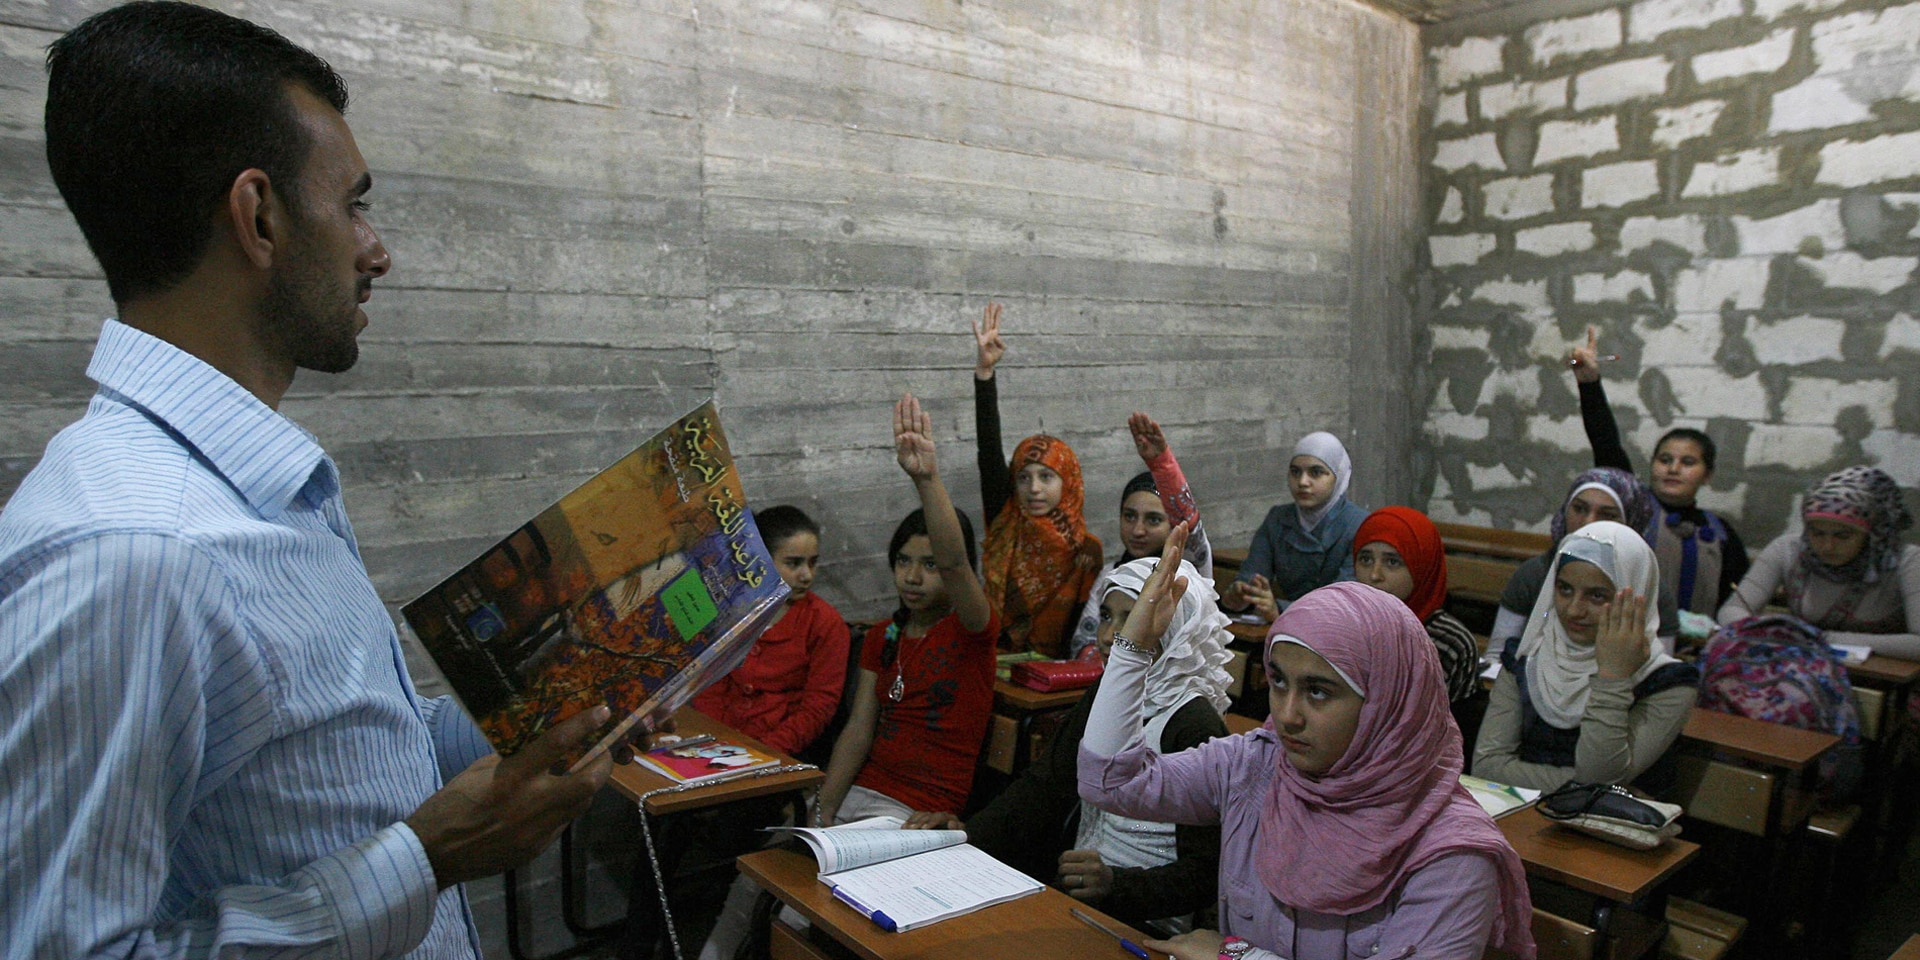 Syrian refugee girls sit in a classroom in Lebanon and stretch their hands.